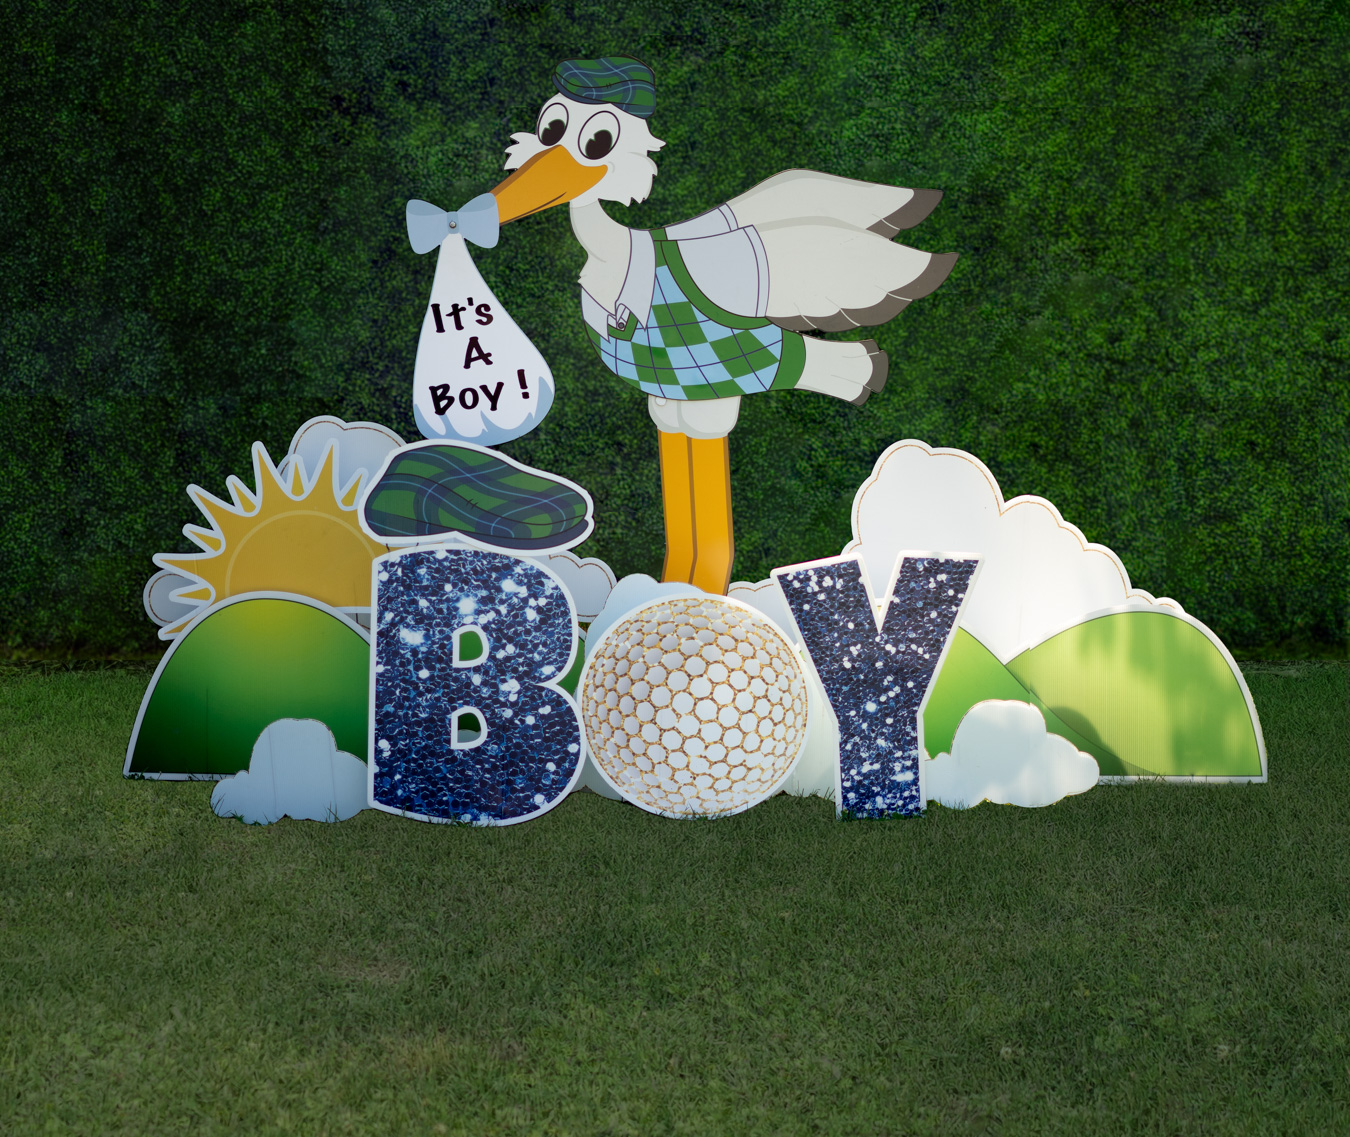 Golf Themed Stork Lawn Sign Rental for Baby Boy